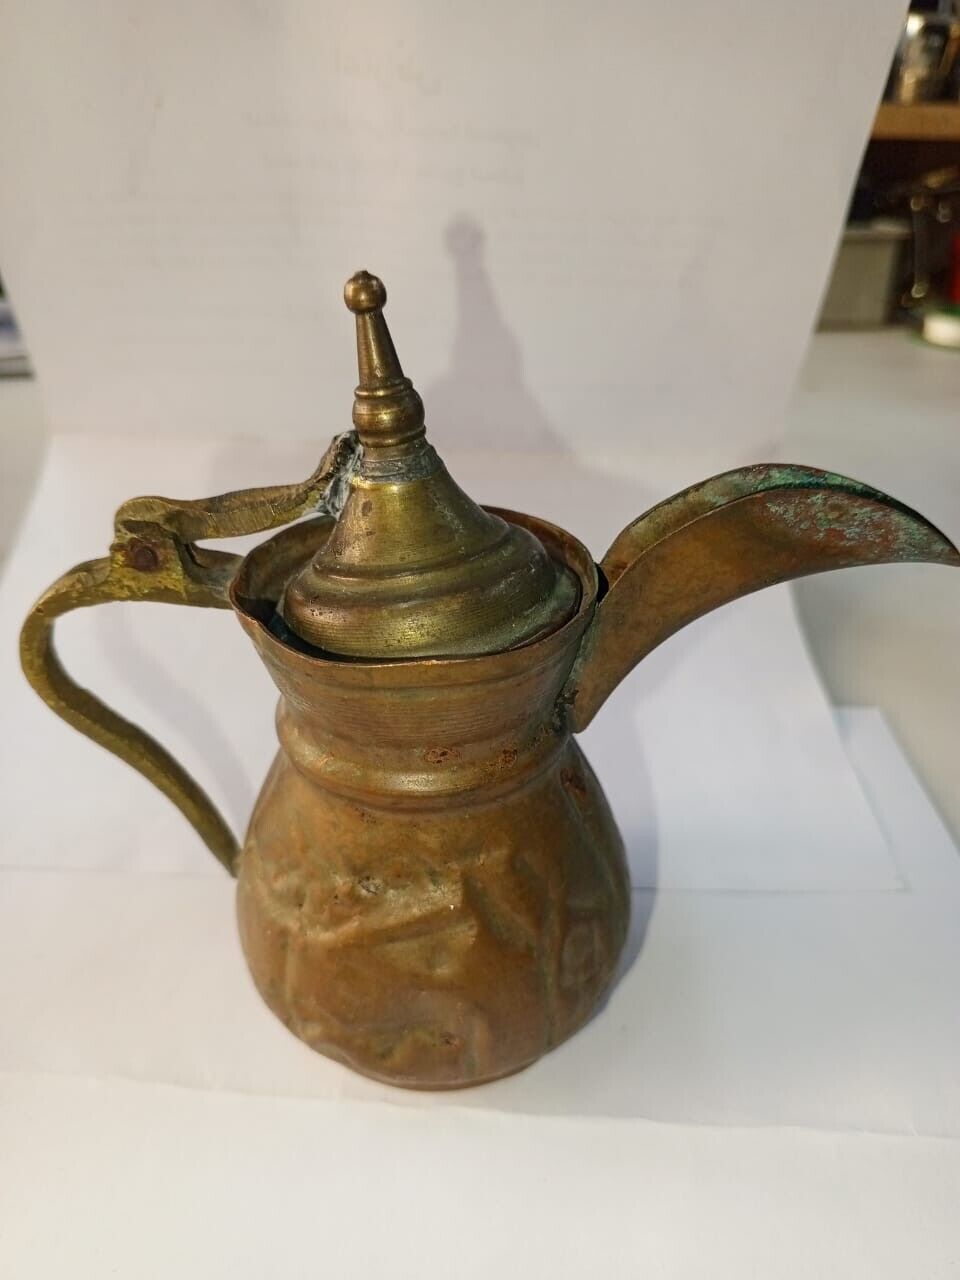 A small size coffee pot, very old, antique copper